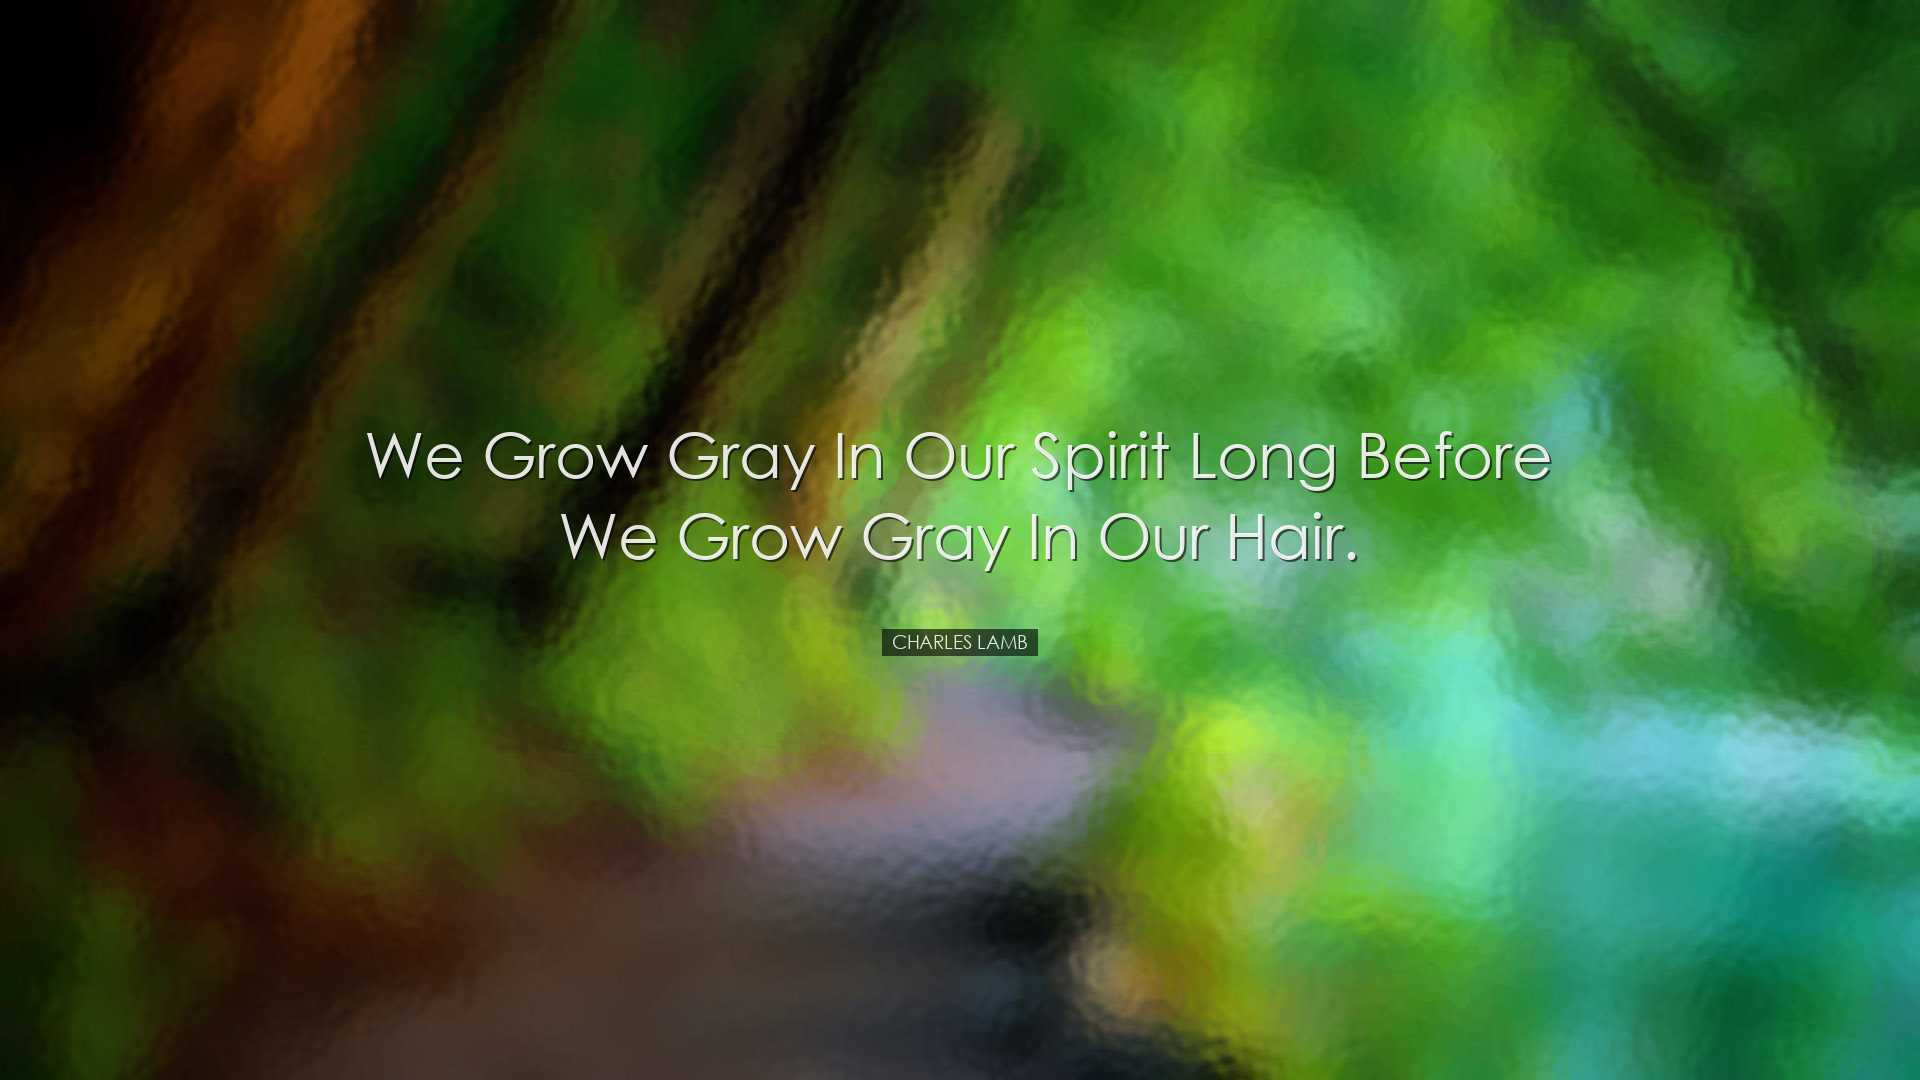 We grow gray in our spirit long before we grow gray in our hair. -